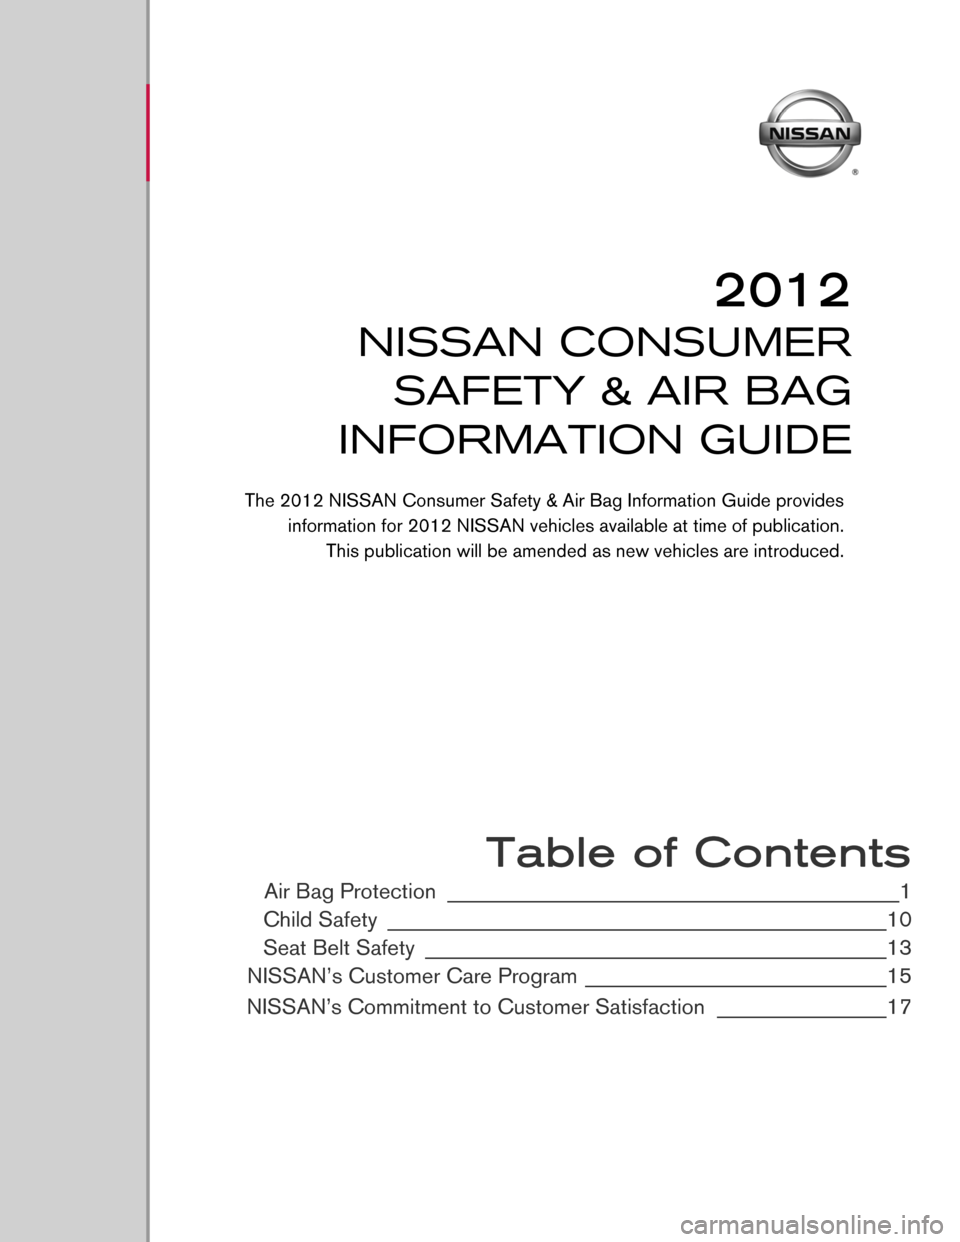 NISSAN ARMADA 2012 1.G Consumer Safety Air Bag Information Guide  
 
 
 
 
 
 
 
 
 
 
 
 
 
 
 
 
 
 
 
 
 
 
 Table of Contents
Air Bag Protection ________________________________________________1
Child Safety
 ____________________________________________________